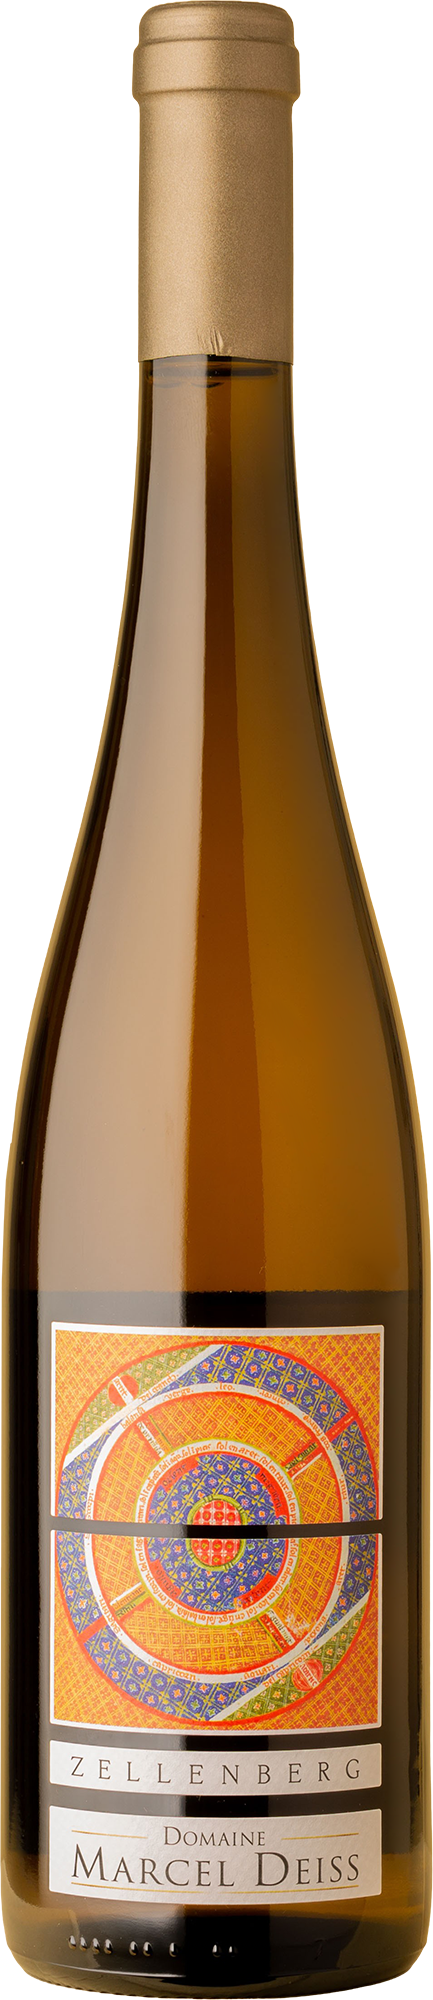 Marcel Deiss - Zellenberg Pinot Blanc / Pinot Gris / Riesling /Auxerrois 2019